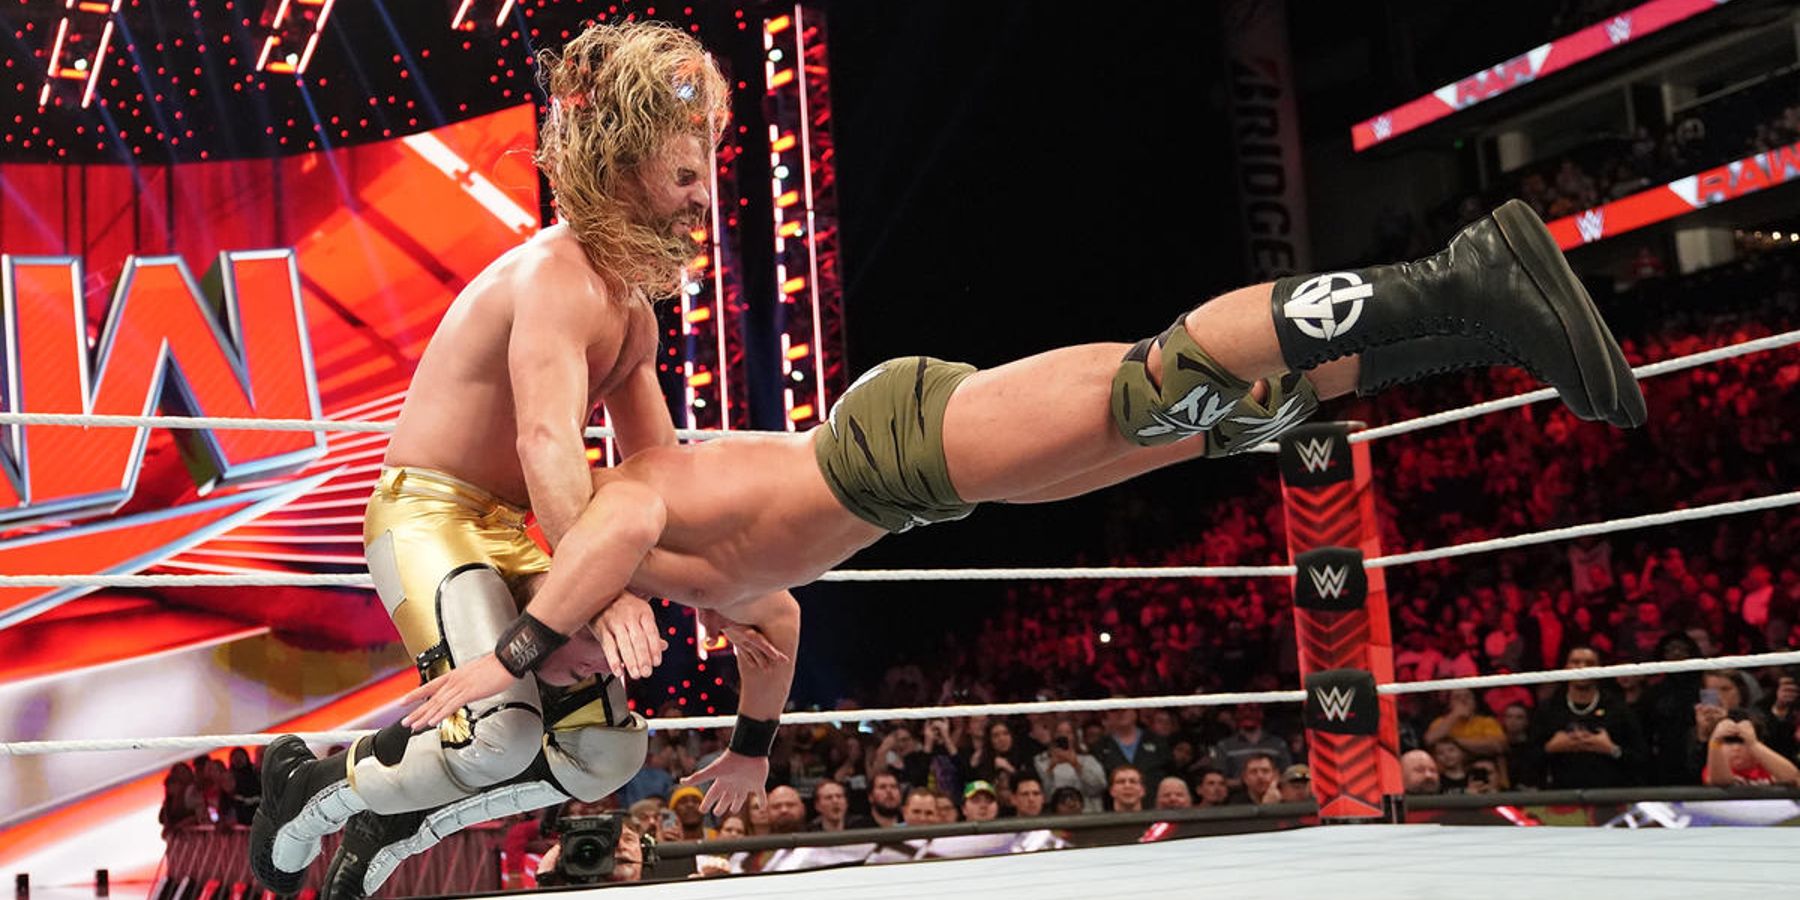 Seth Rollins delivers a pedigree to Austin Theory during the January 2 episode of WWE Raw in 2023.